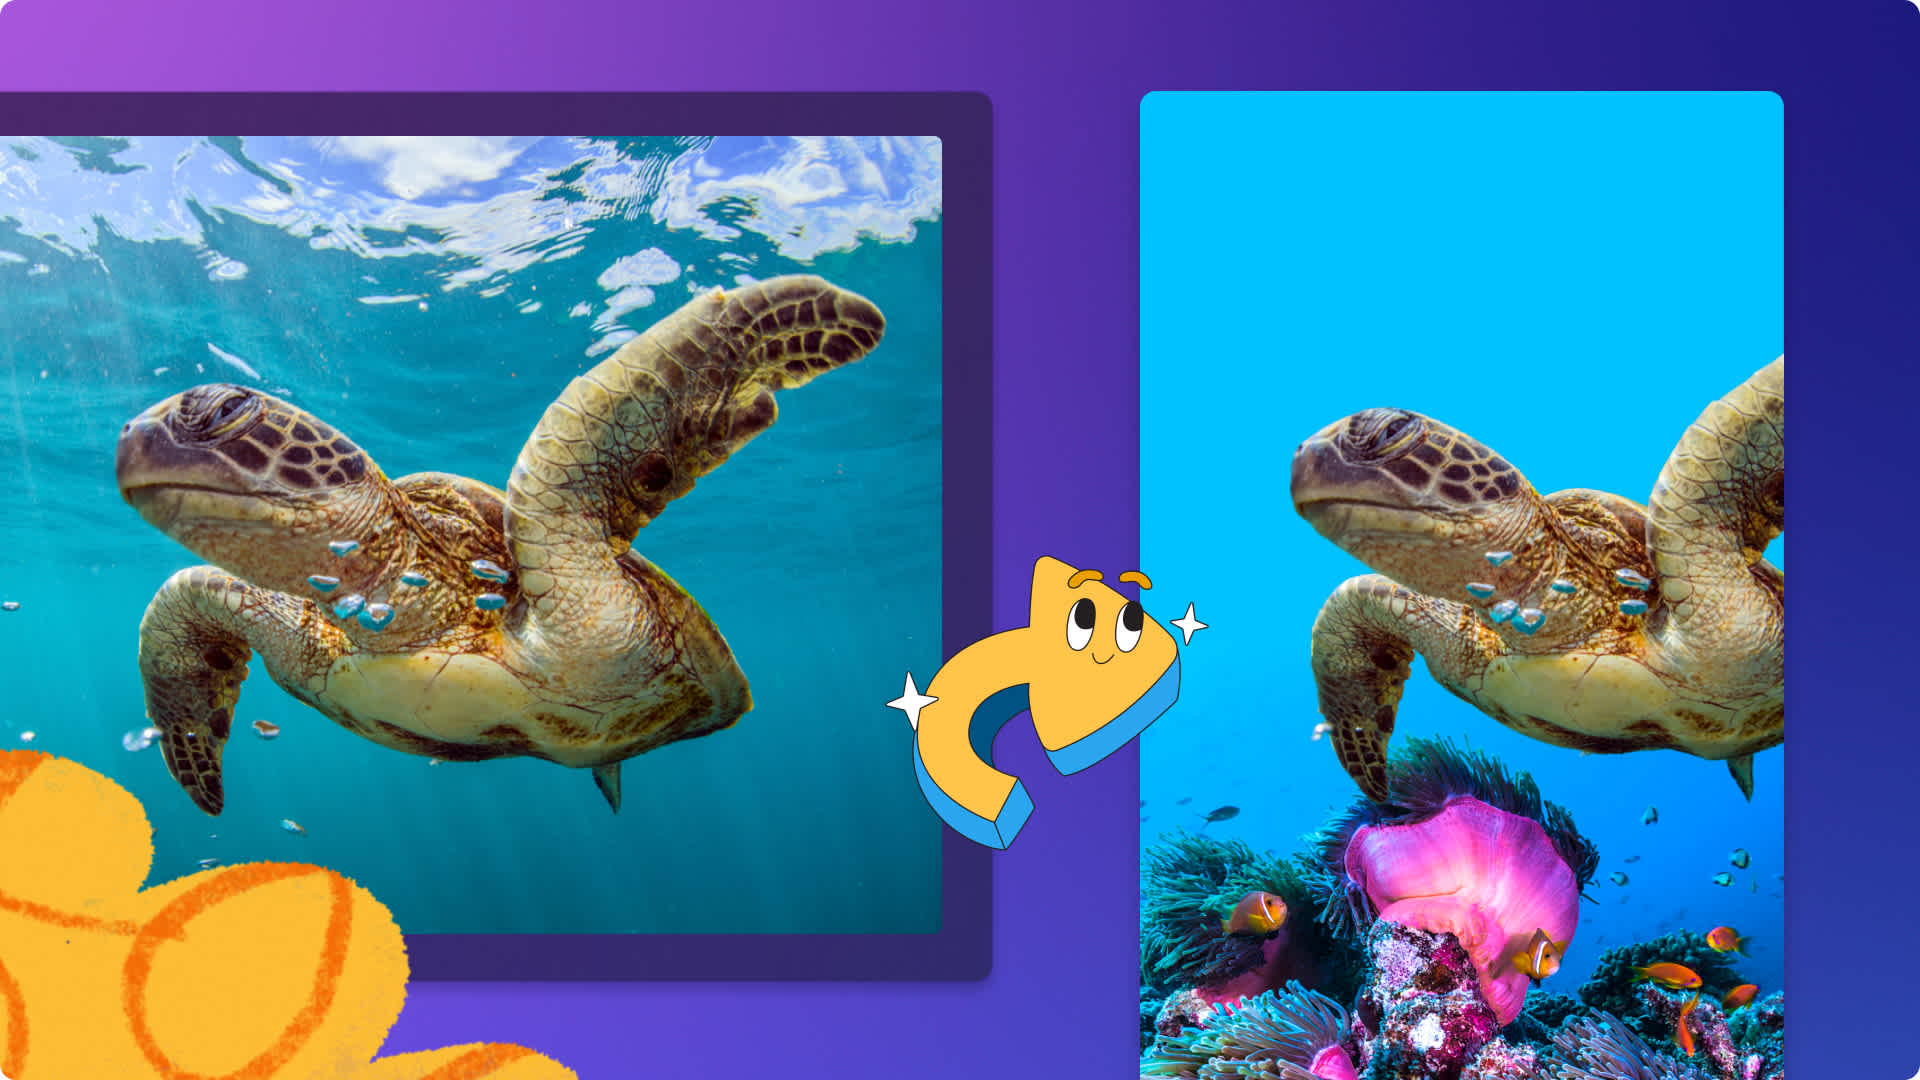 An image of a user removing a background of an under the sea image.